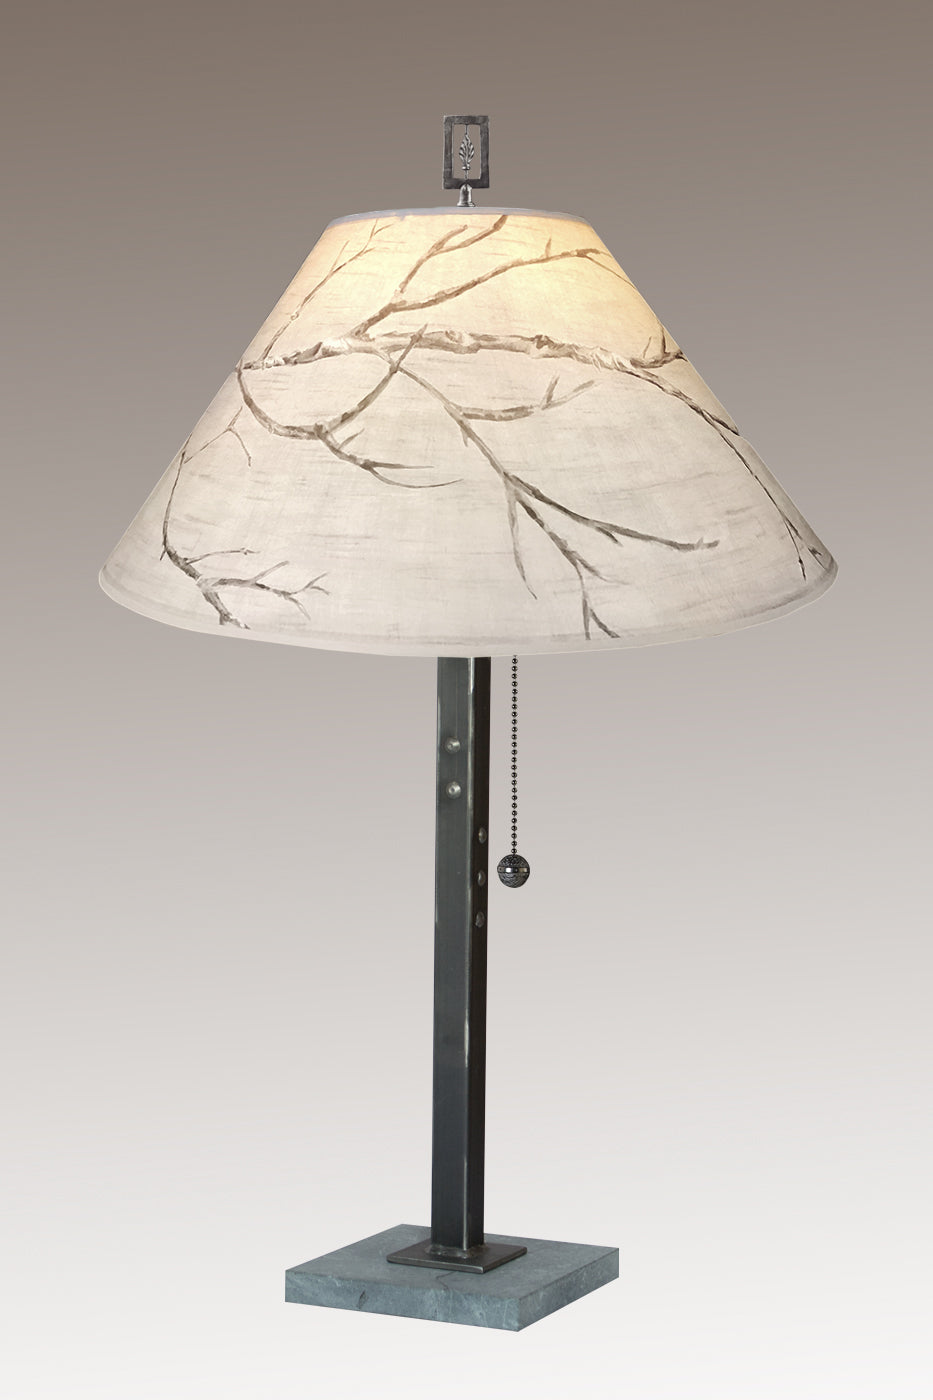 Janna Ugone &amp; Co Table Lamps Steel Table Lamp with Large Conical Shade in Sweeping Branch